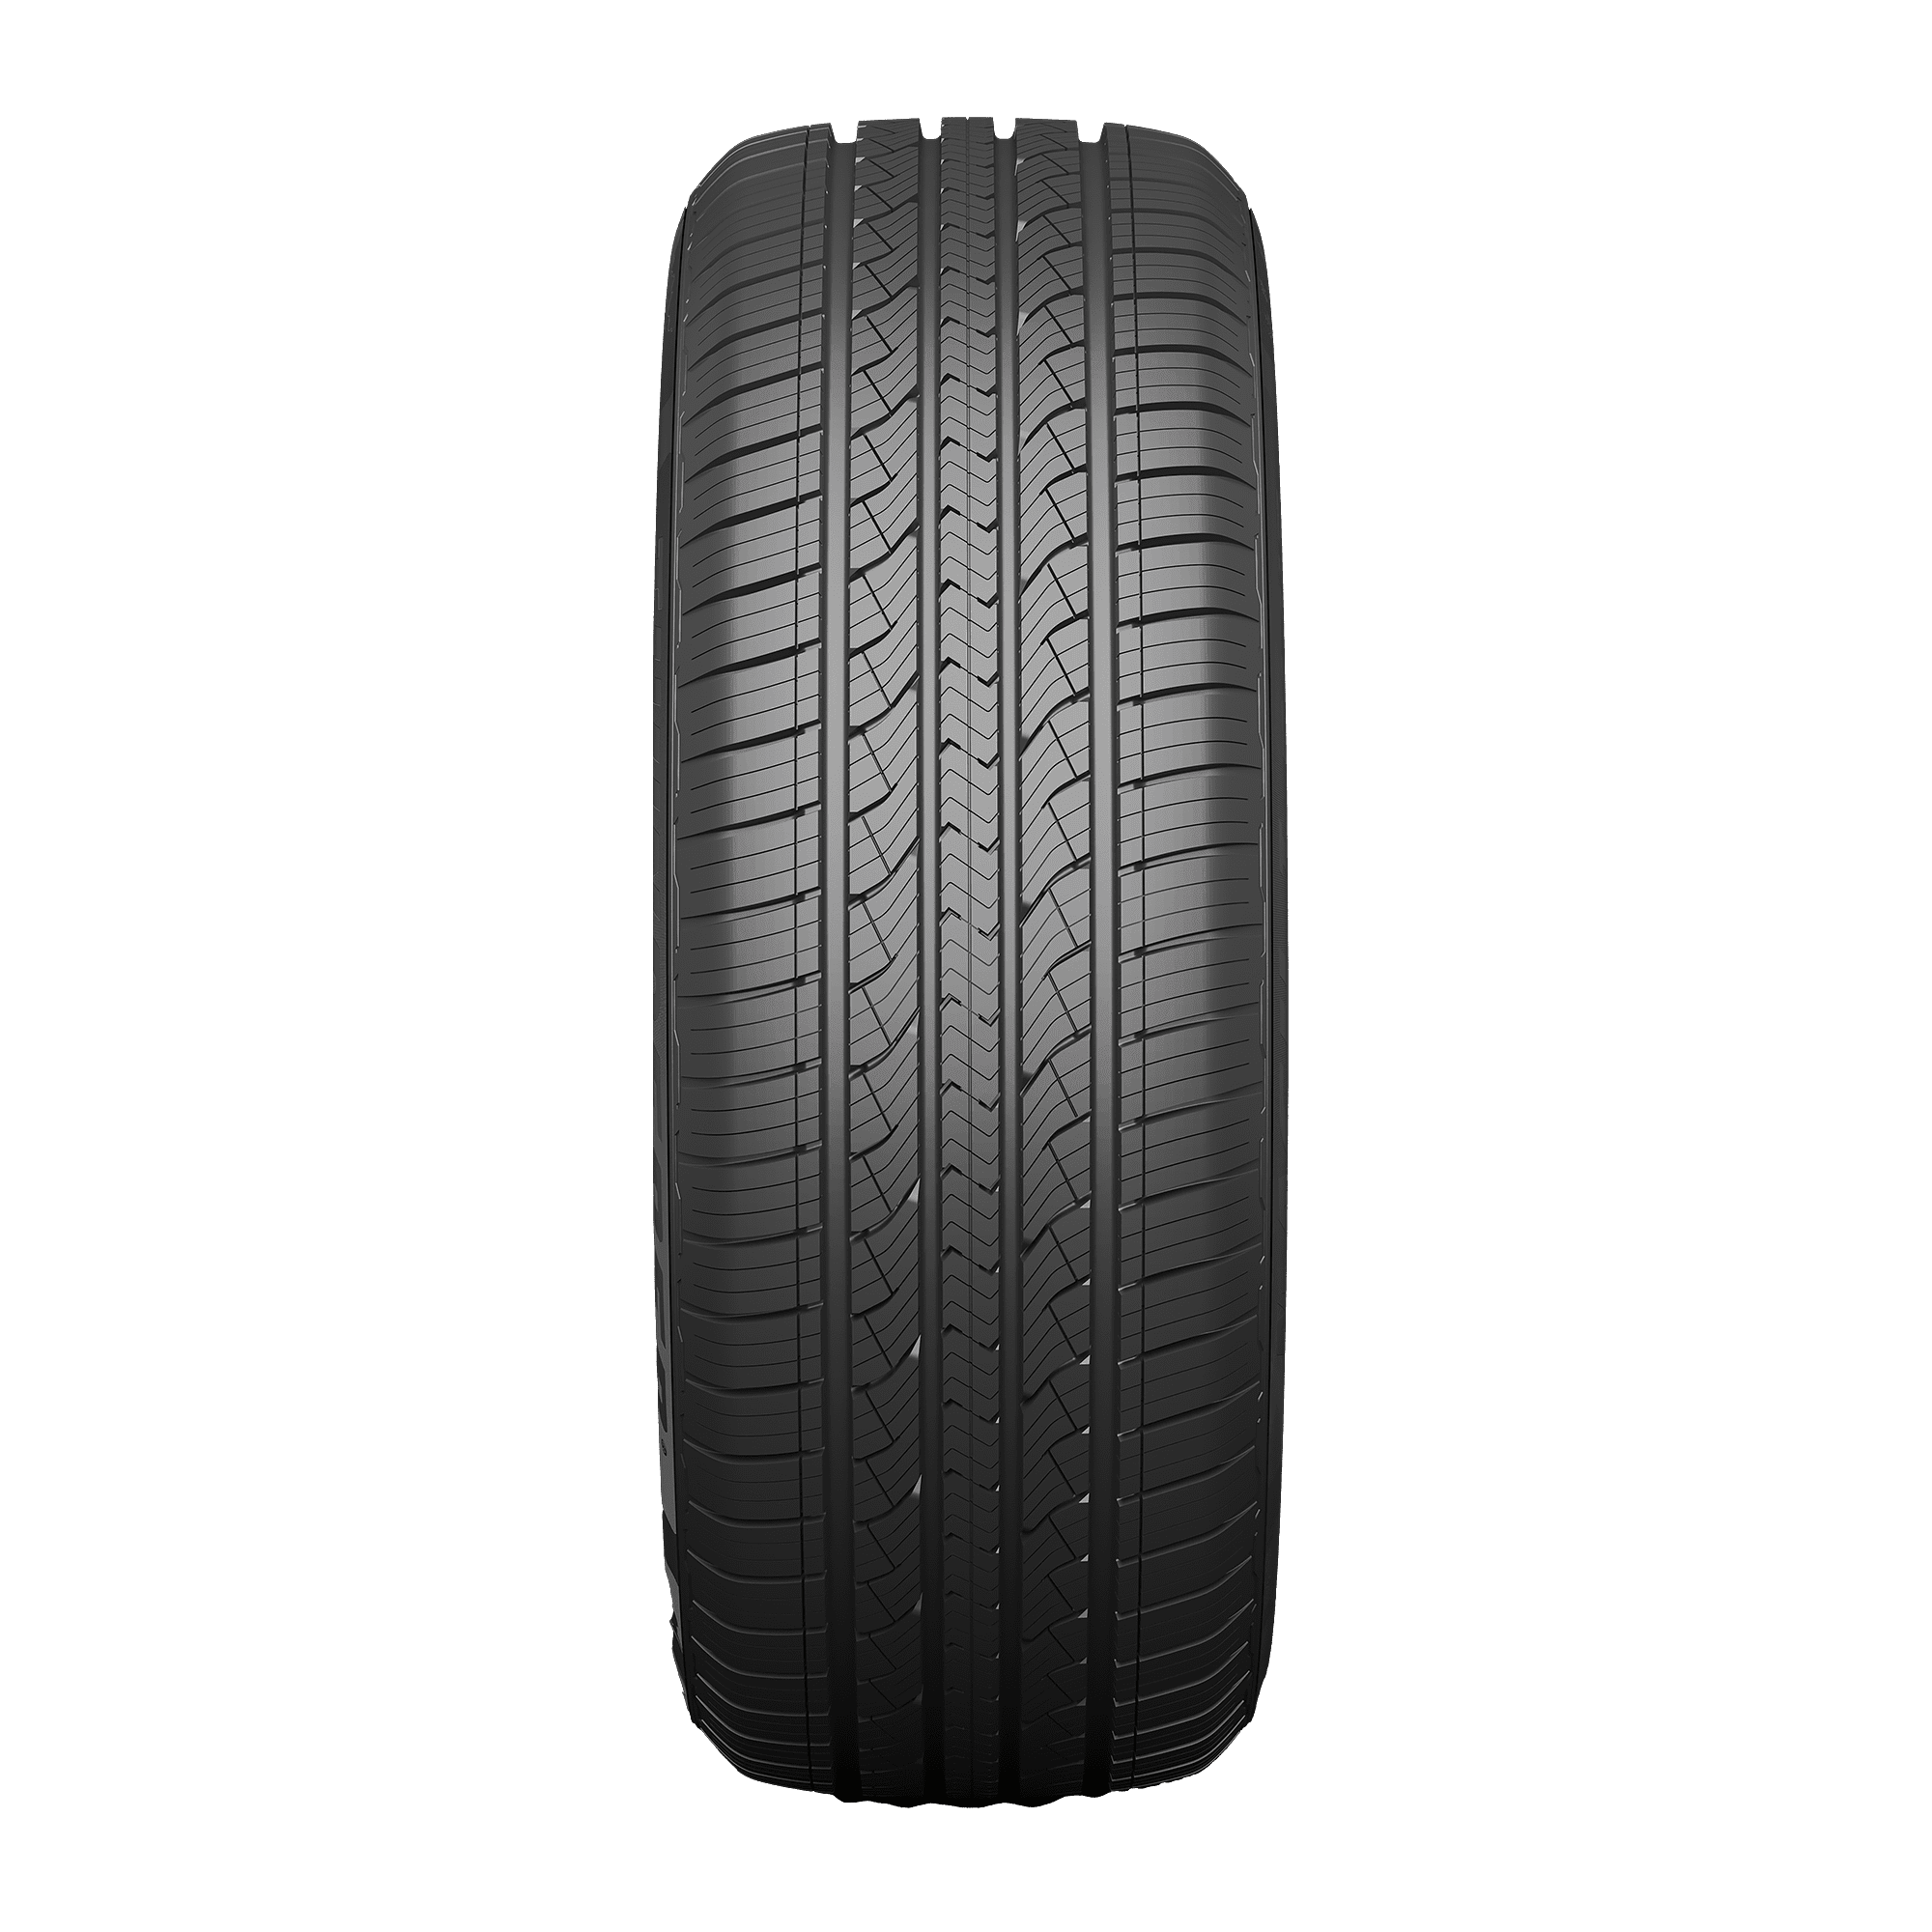 Shop for 205/60R16 Tires for Your Vehicle | SimpleTire